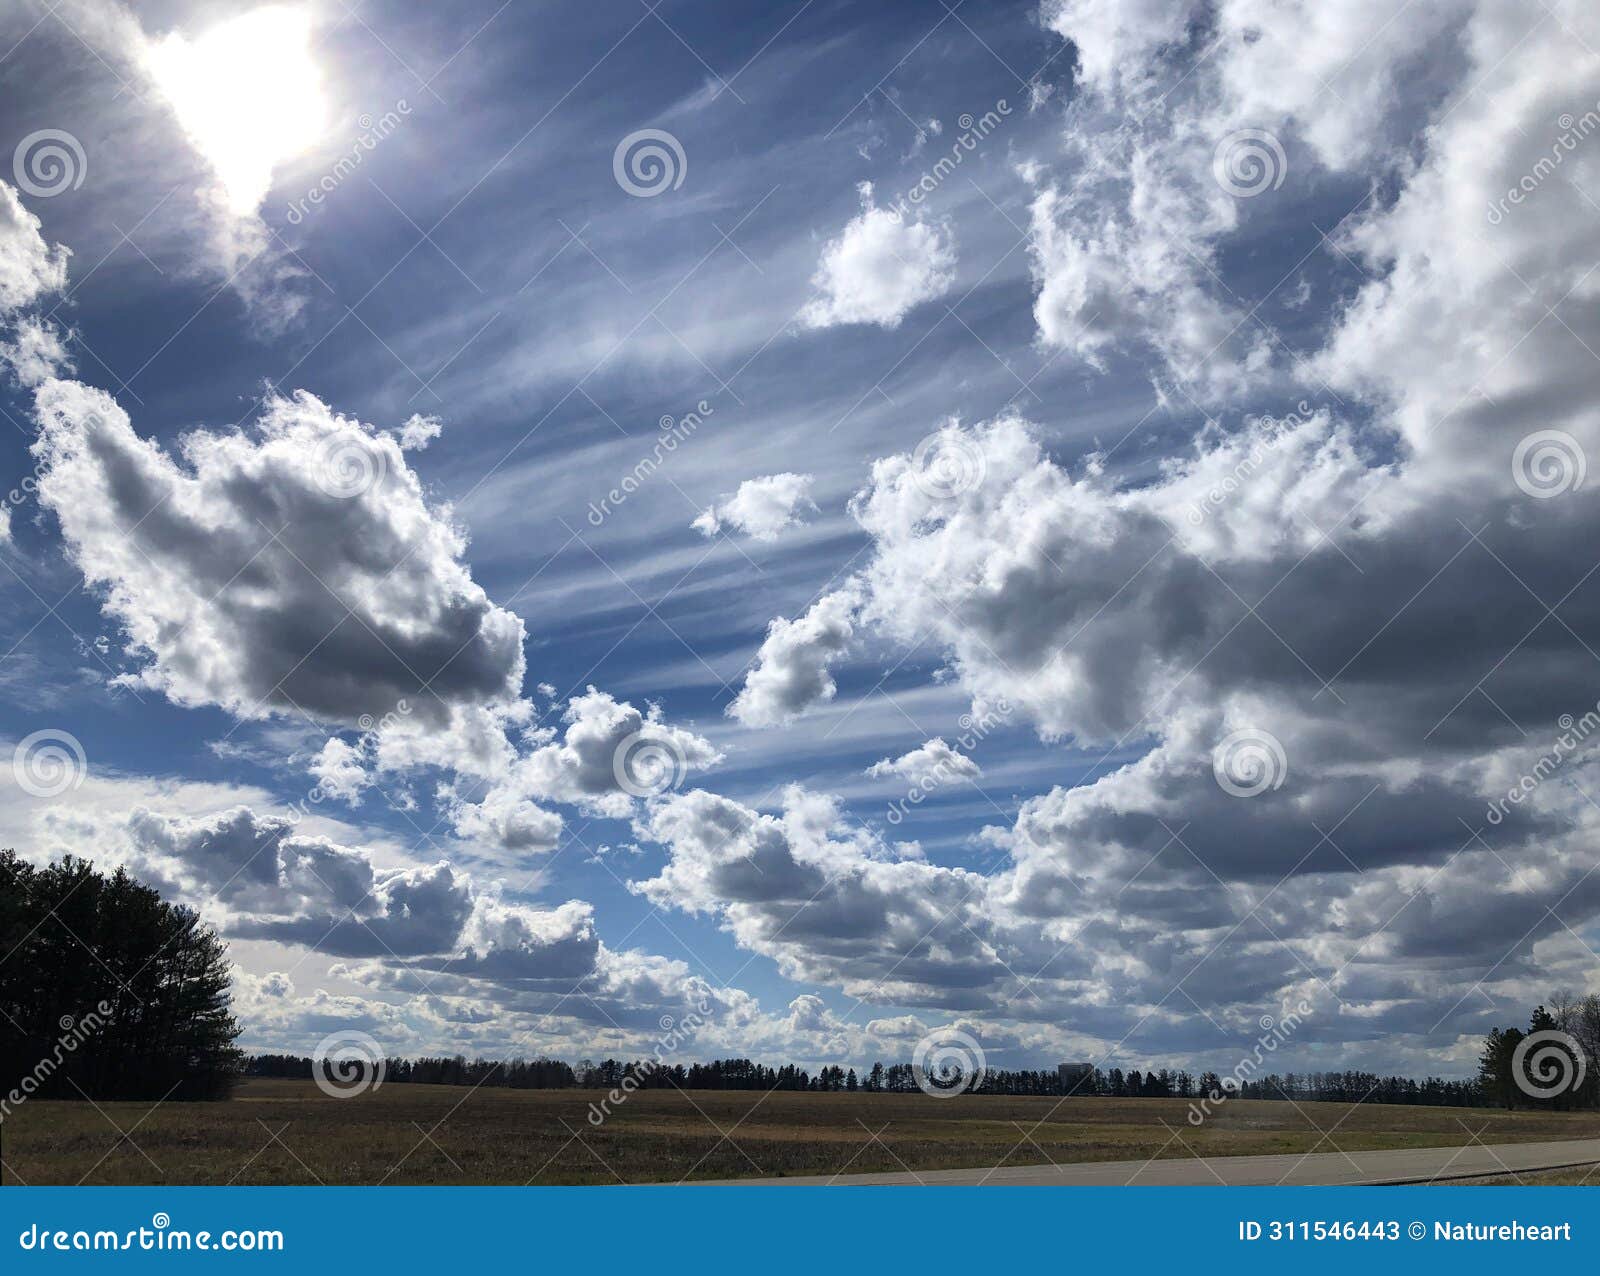 deep blue sky with various white clouds 4